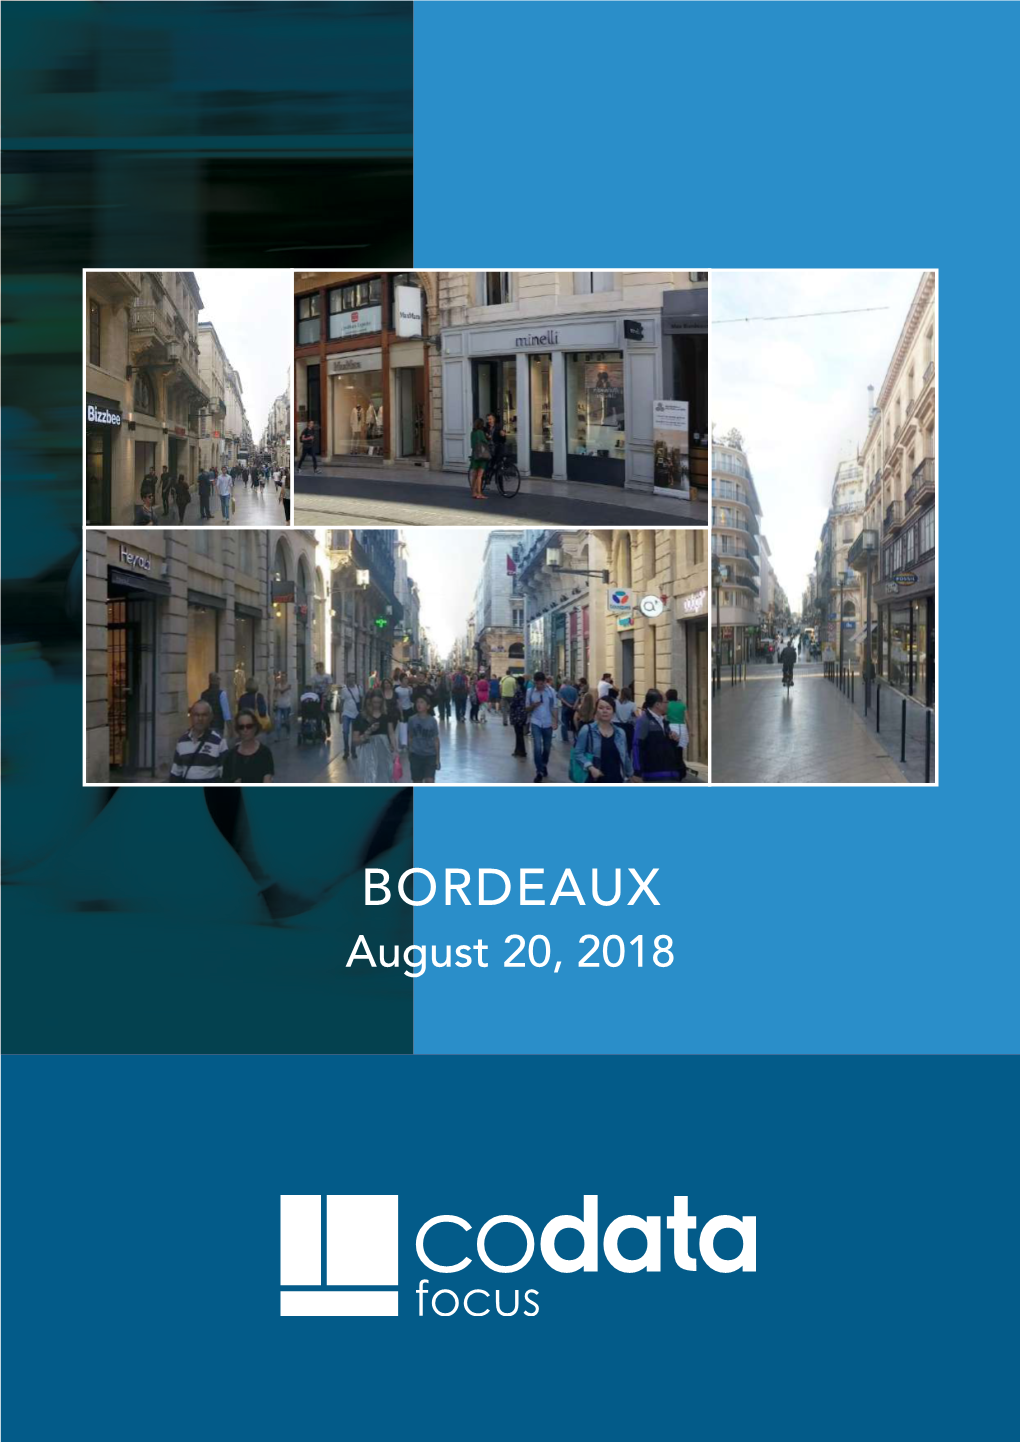 Download the Codata Focus on the City Centre of Bordeaux